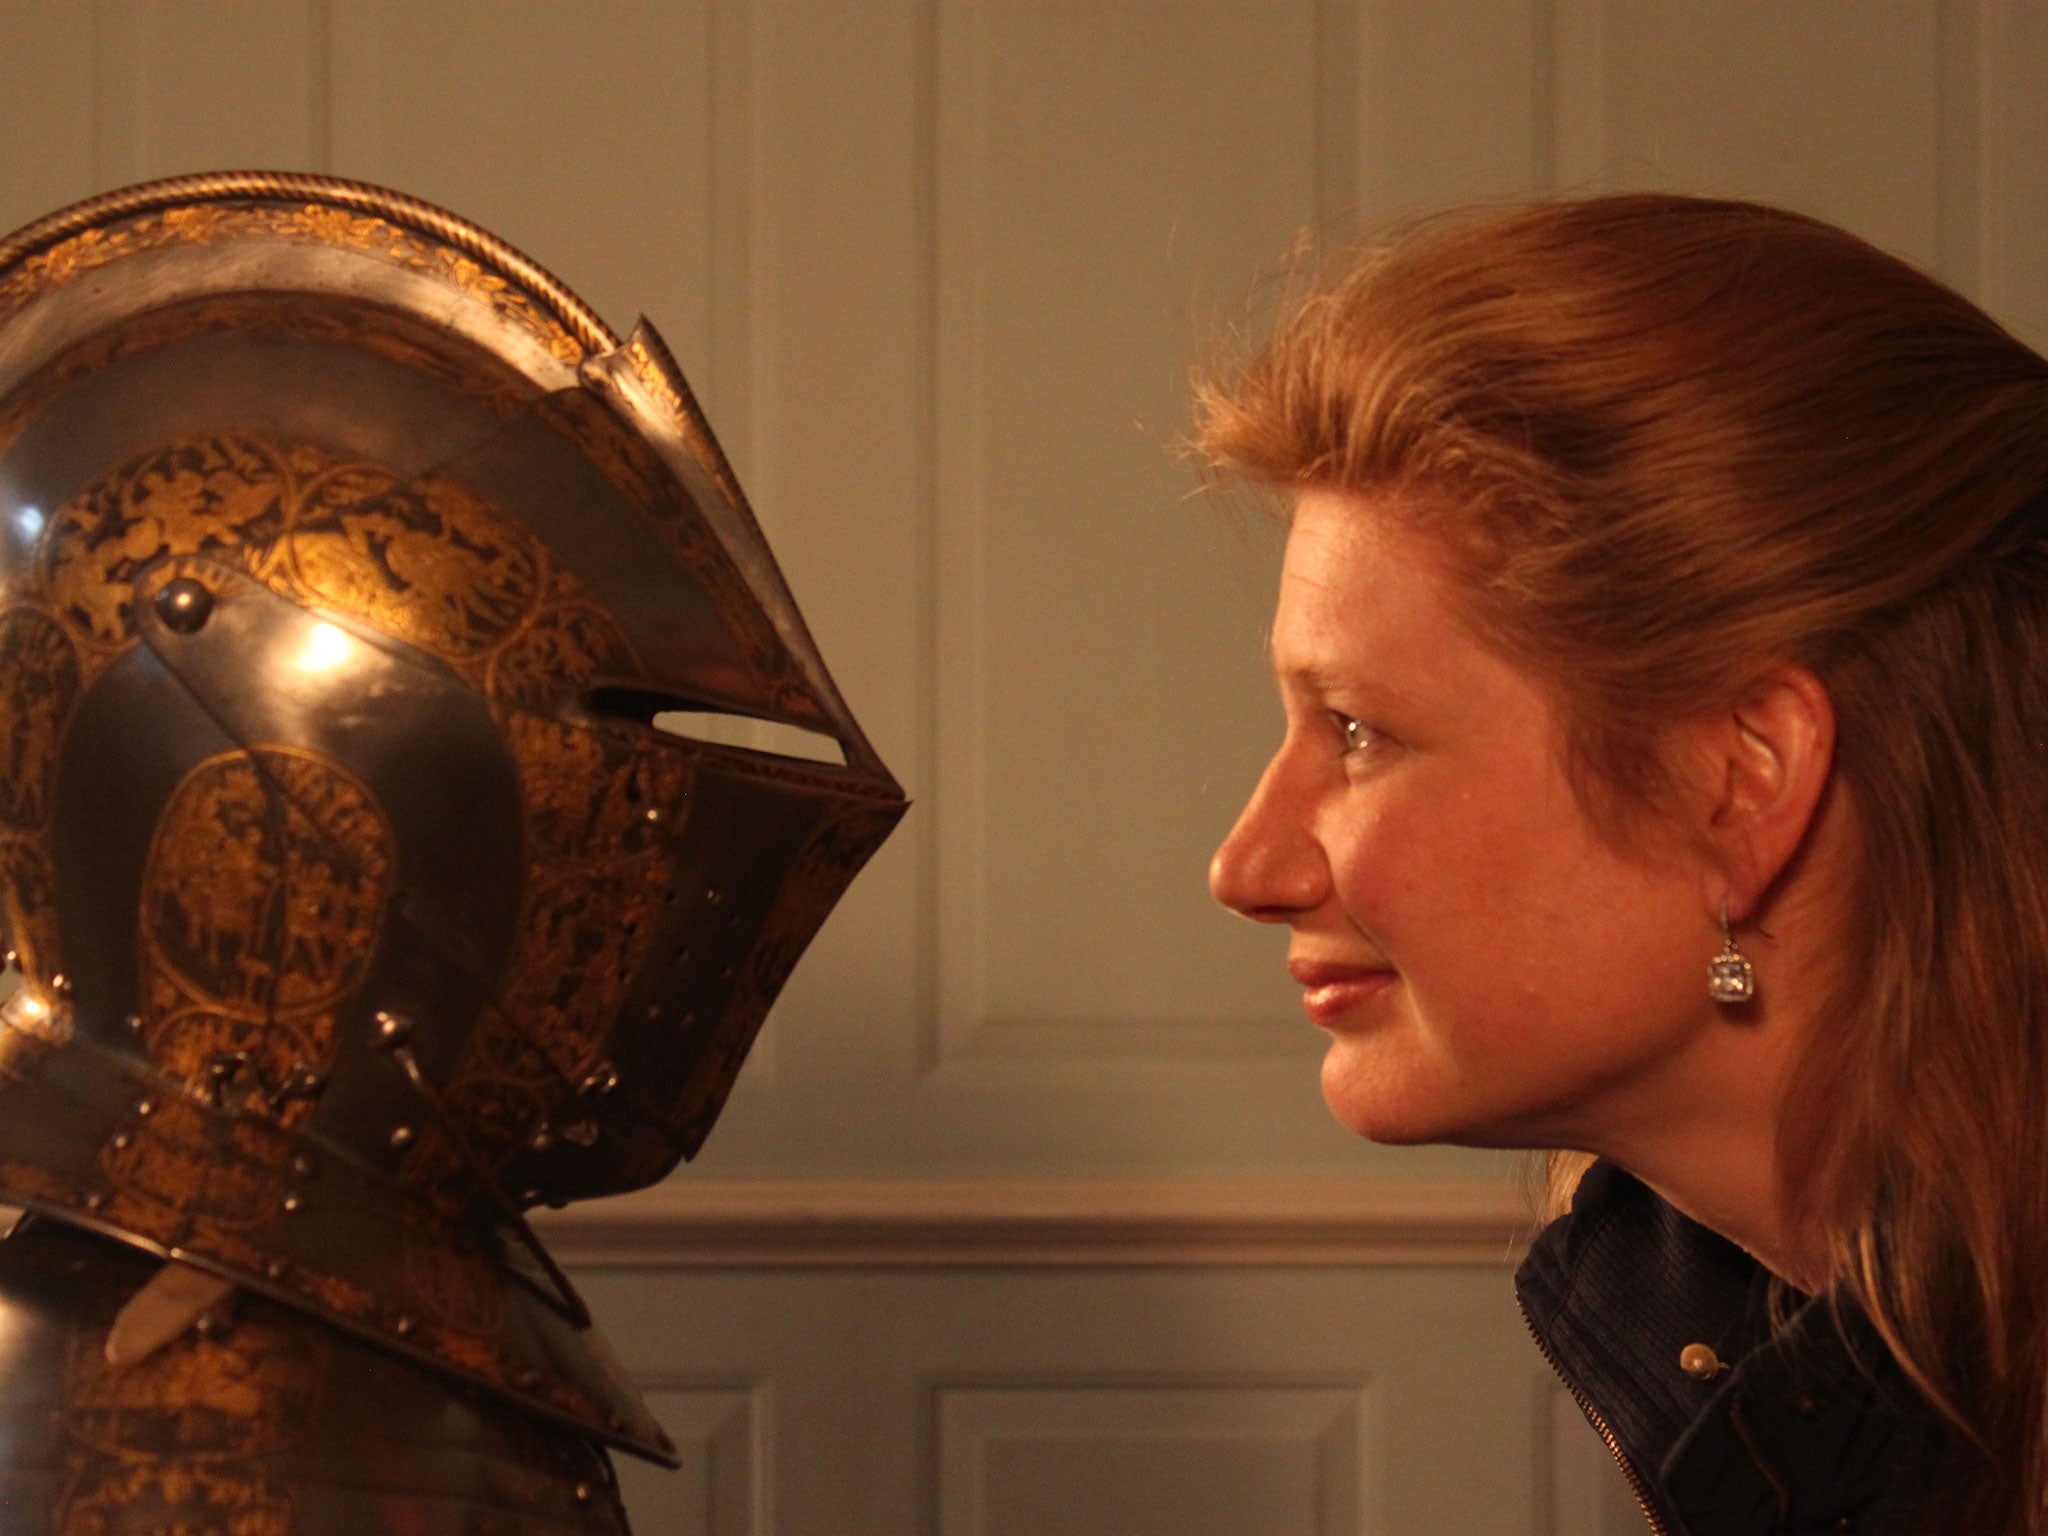 An in-depth look: Dr Clare Jackson, presenter of ‘The Stuarts’, and the helmet of Henry Stuart, Prince of Wales